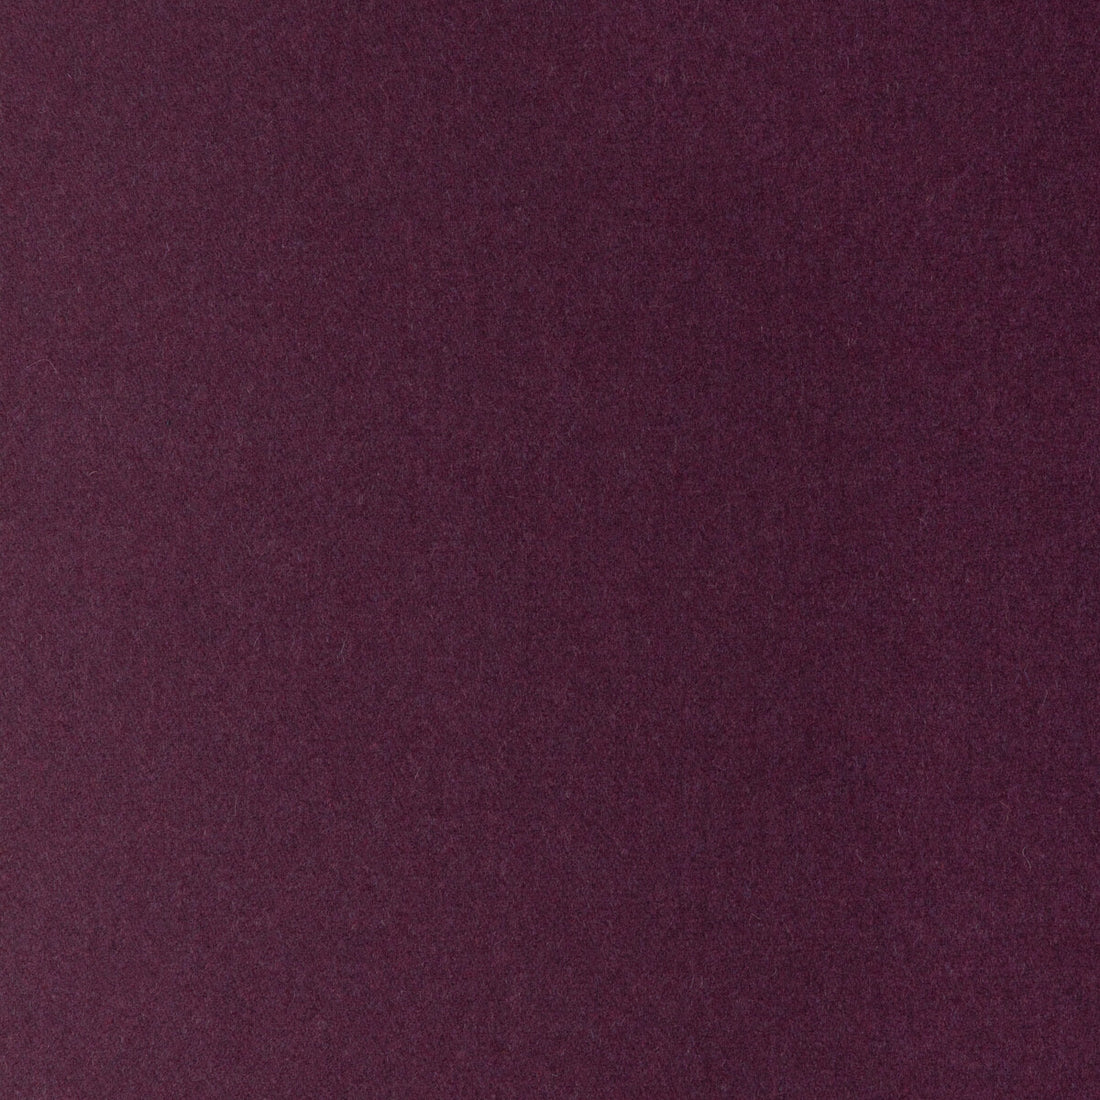 Basanite fabric in aubergine color - pattern 34615.1010.0 - by Kravet Couture in the Calvin Klein Home collection